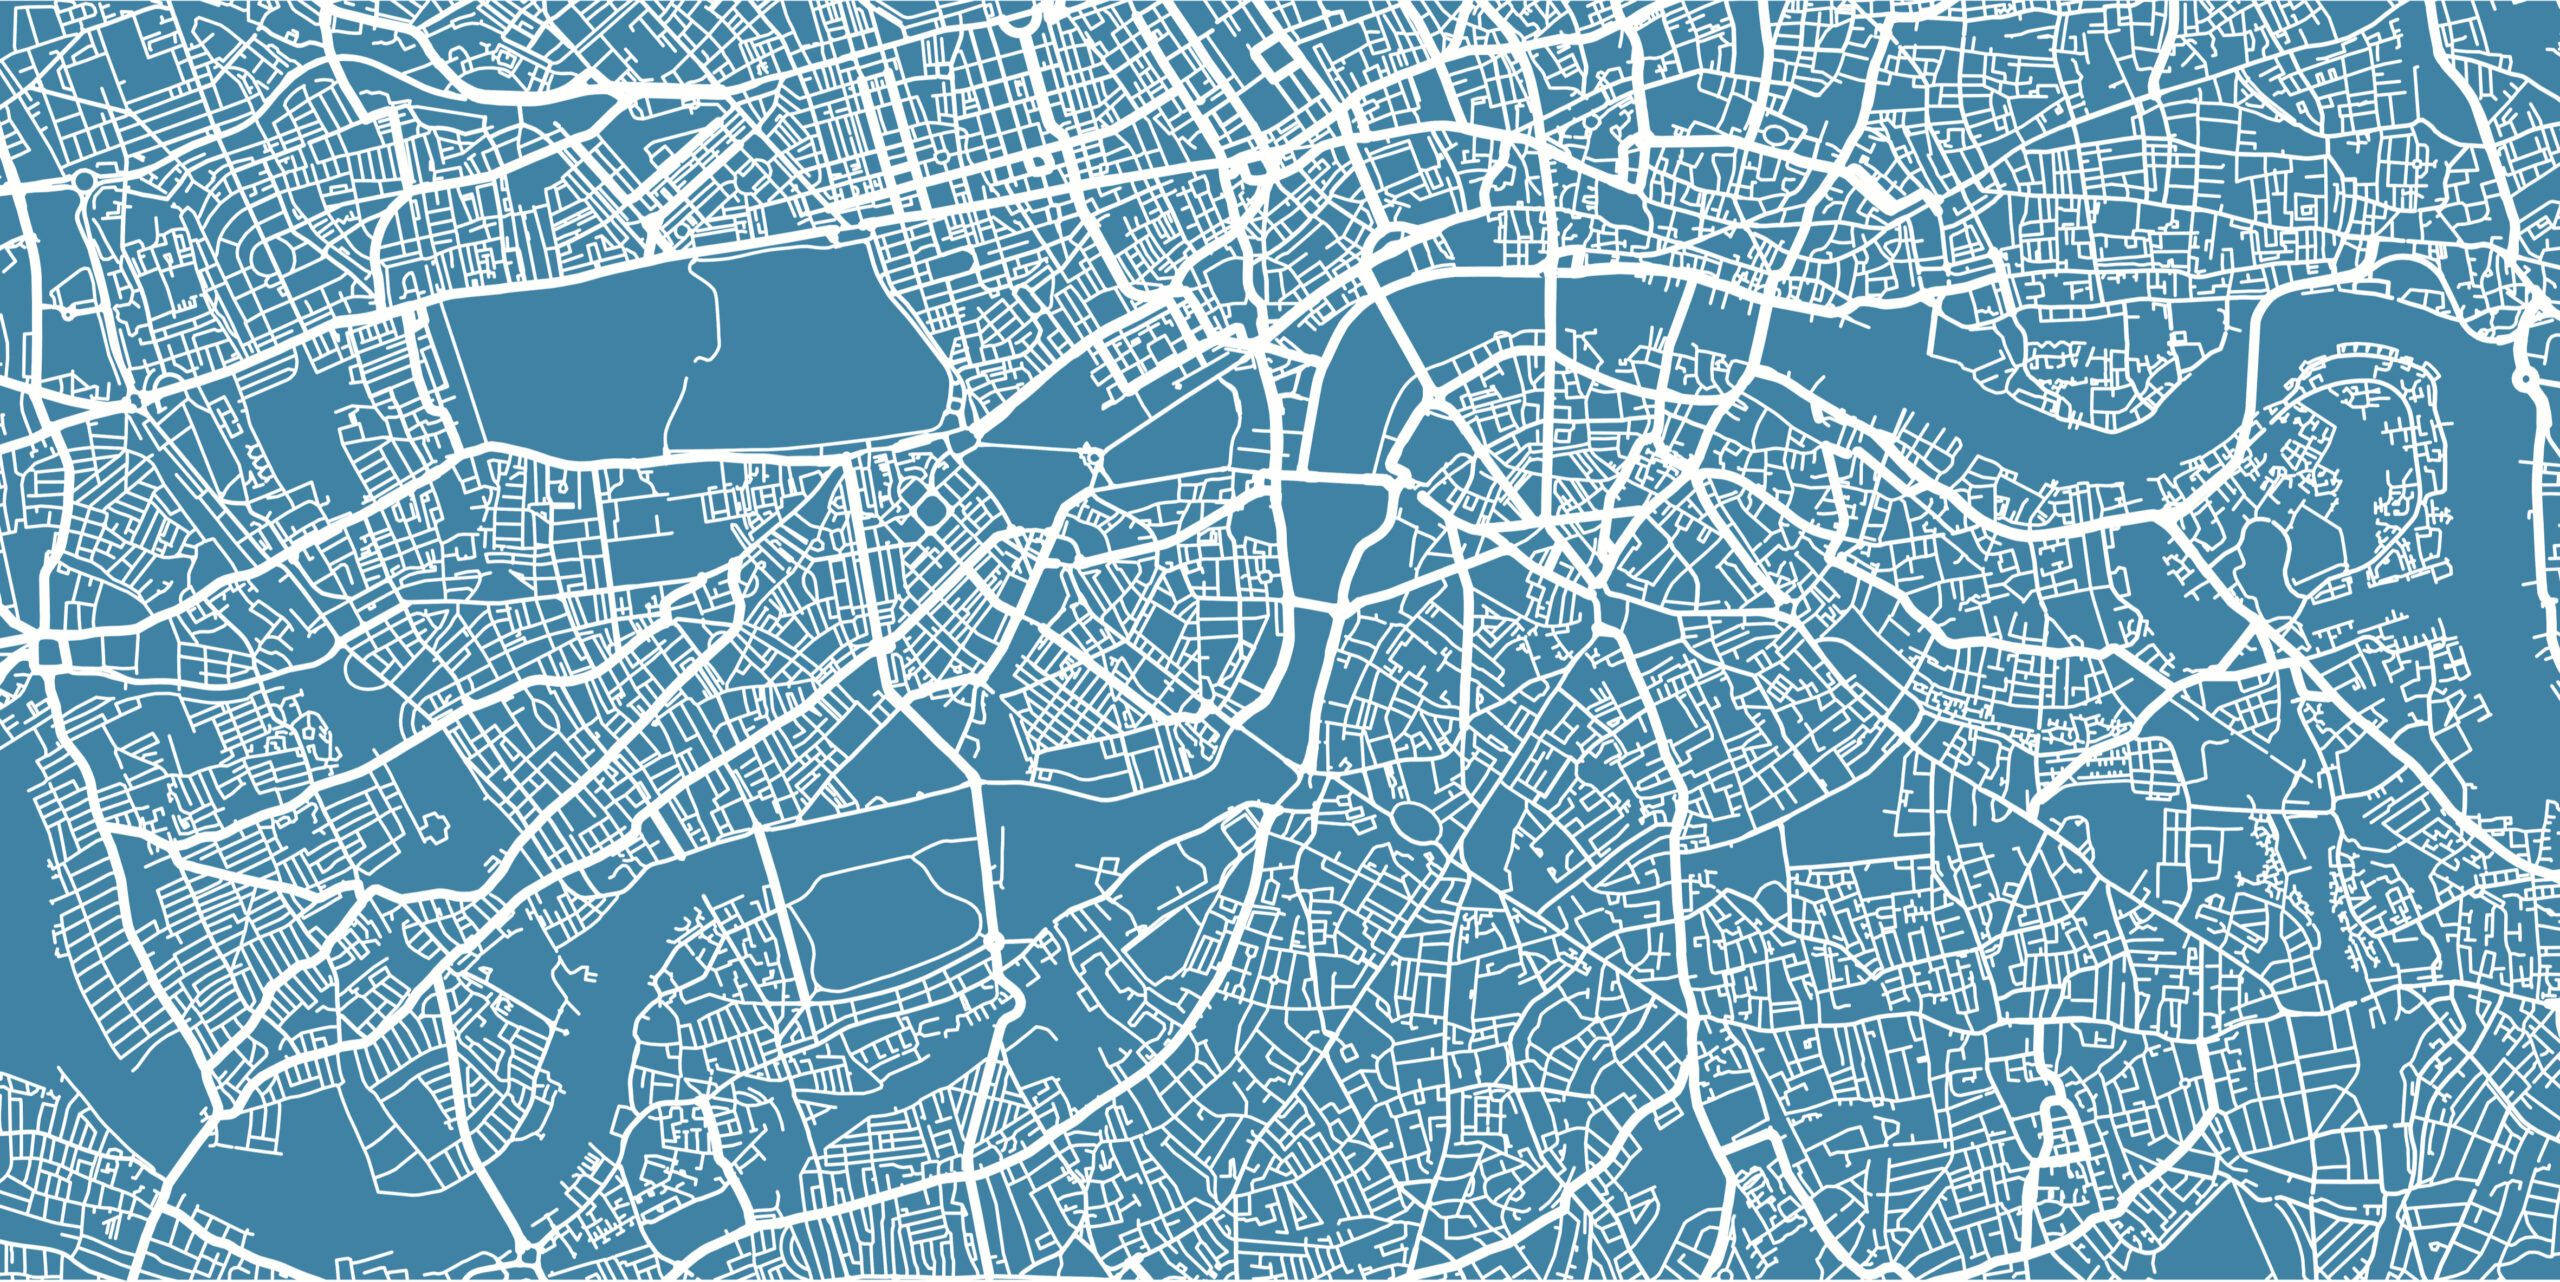 A blue and white map of West & Central London